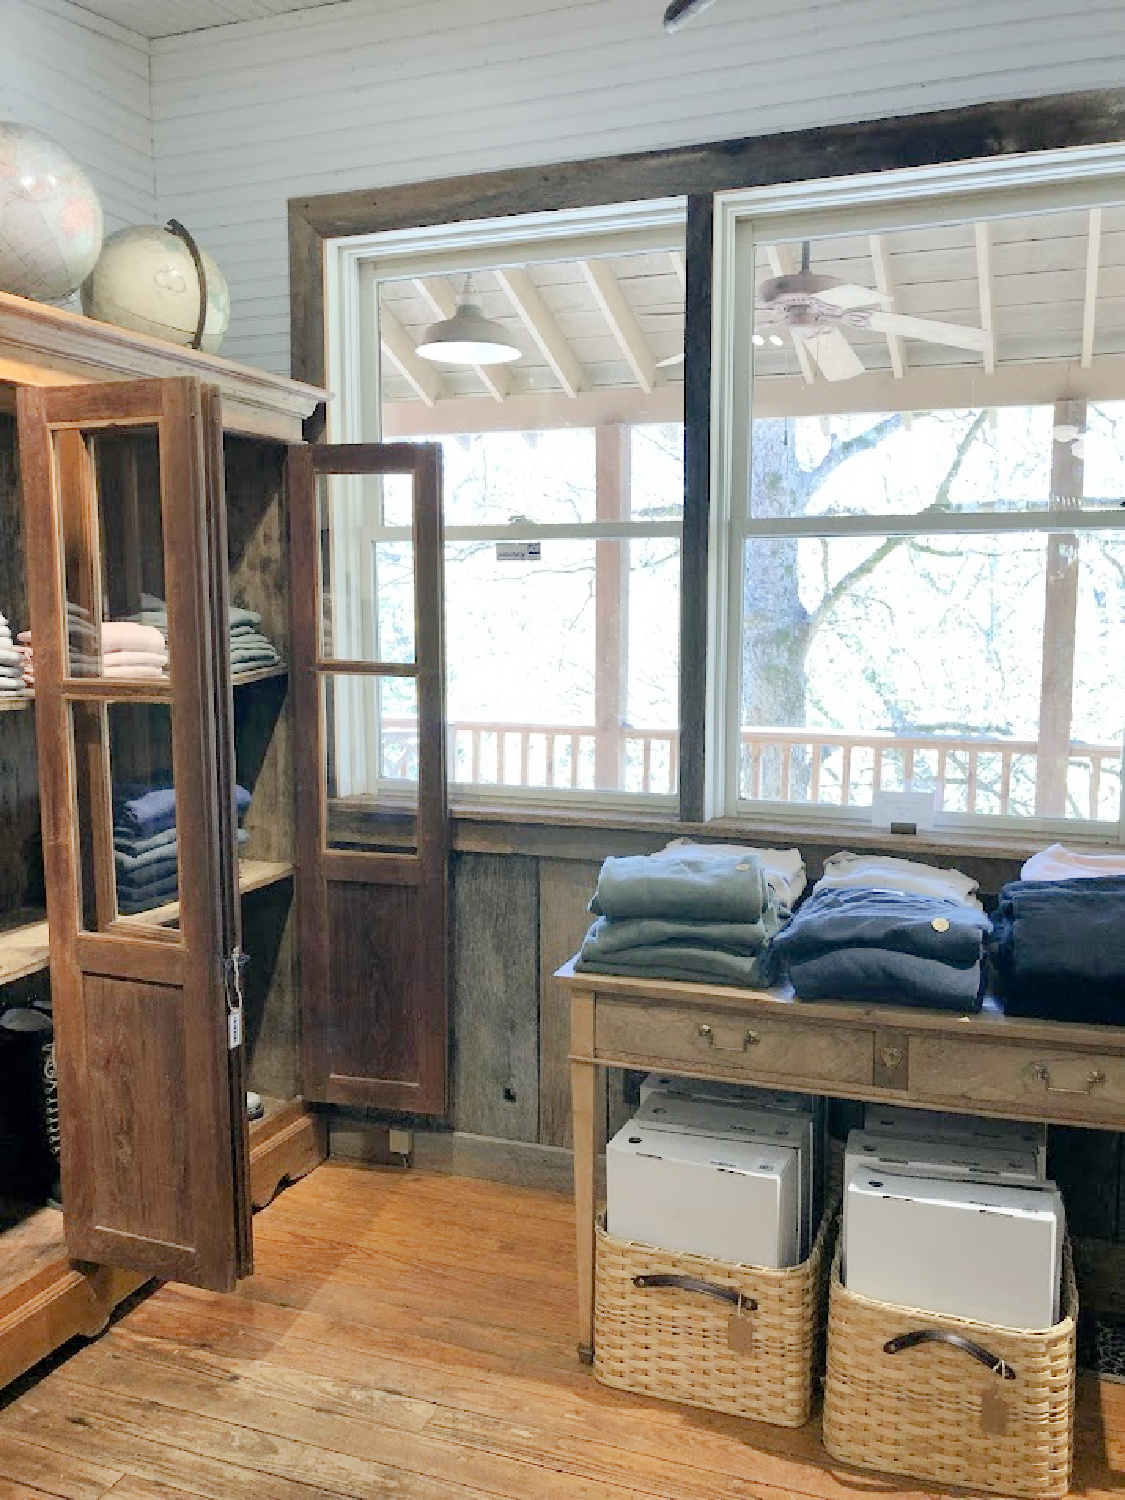 Giannetti designed clothing in antique cupboards in shop near Franklin - Patina Home & Garden shop from Giannettis in Leiper's Fork, TN - Hello Lovely Studio. #patinahome #leipersforktn